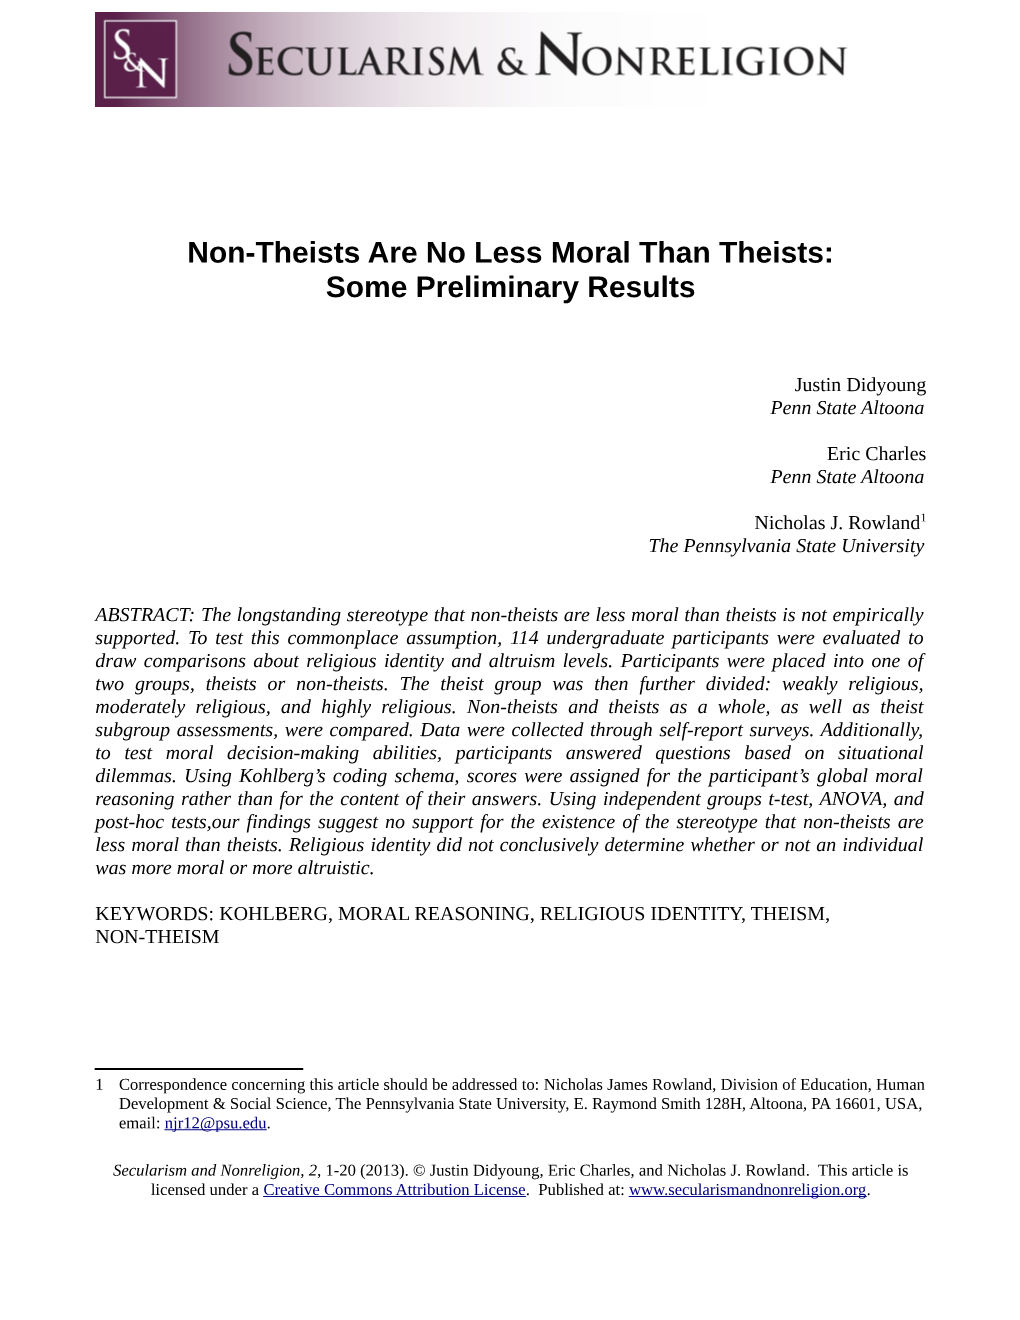 Non-Theists Are No Less Moral Than Theists: Some Preliminary Results